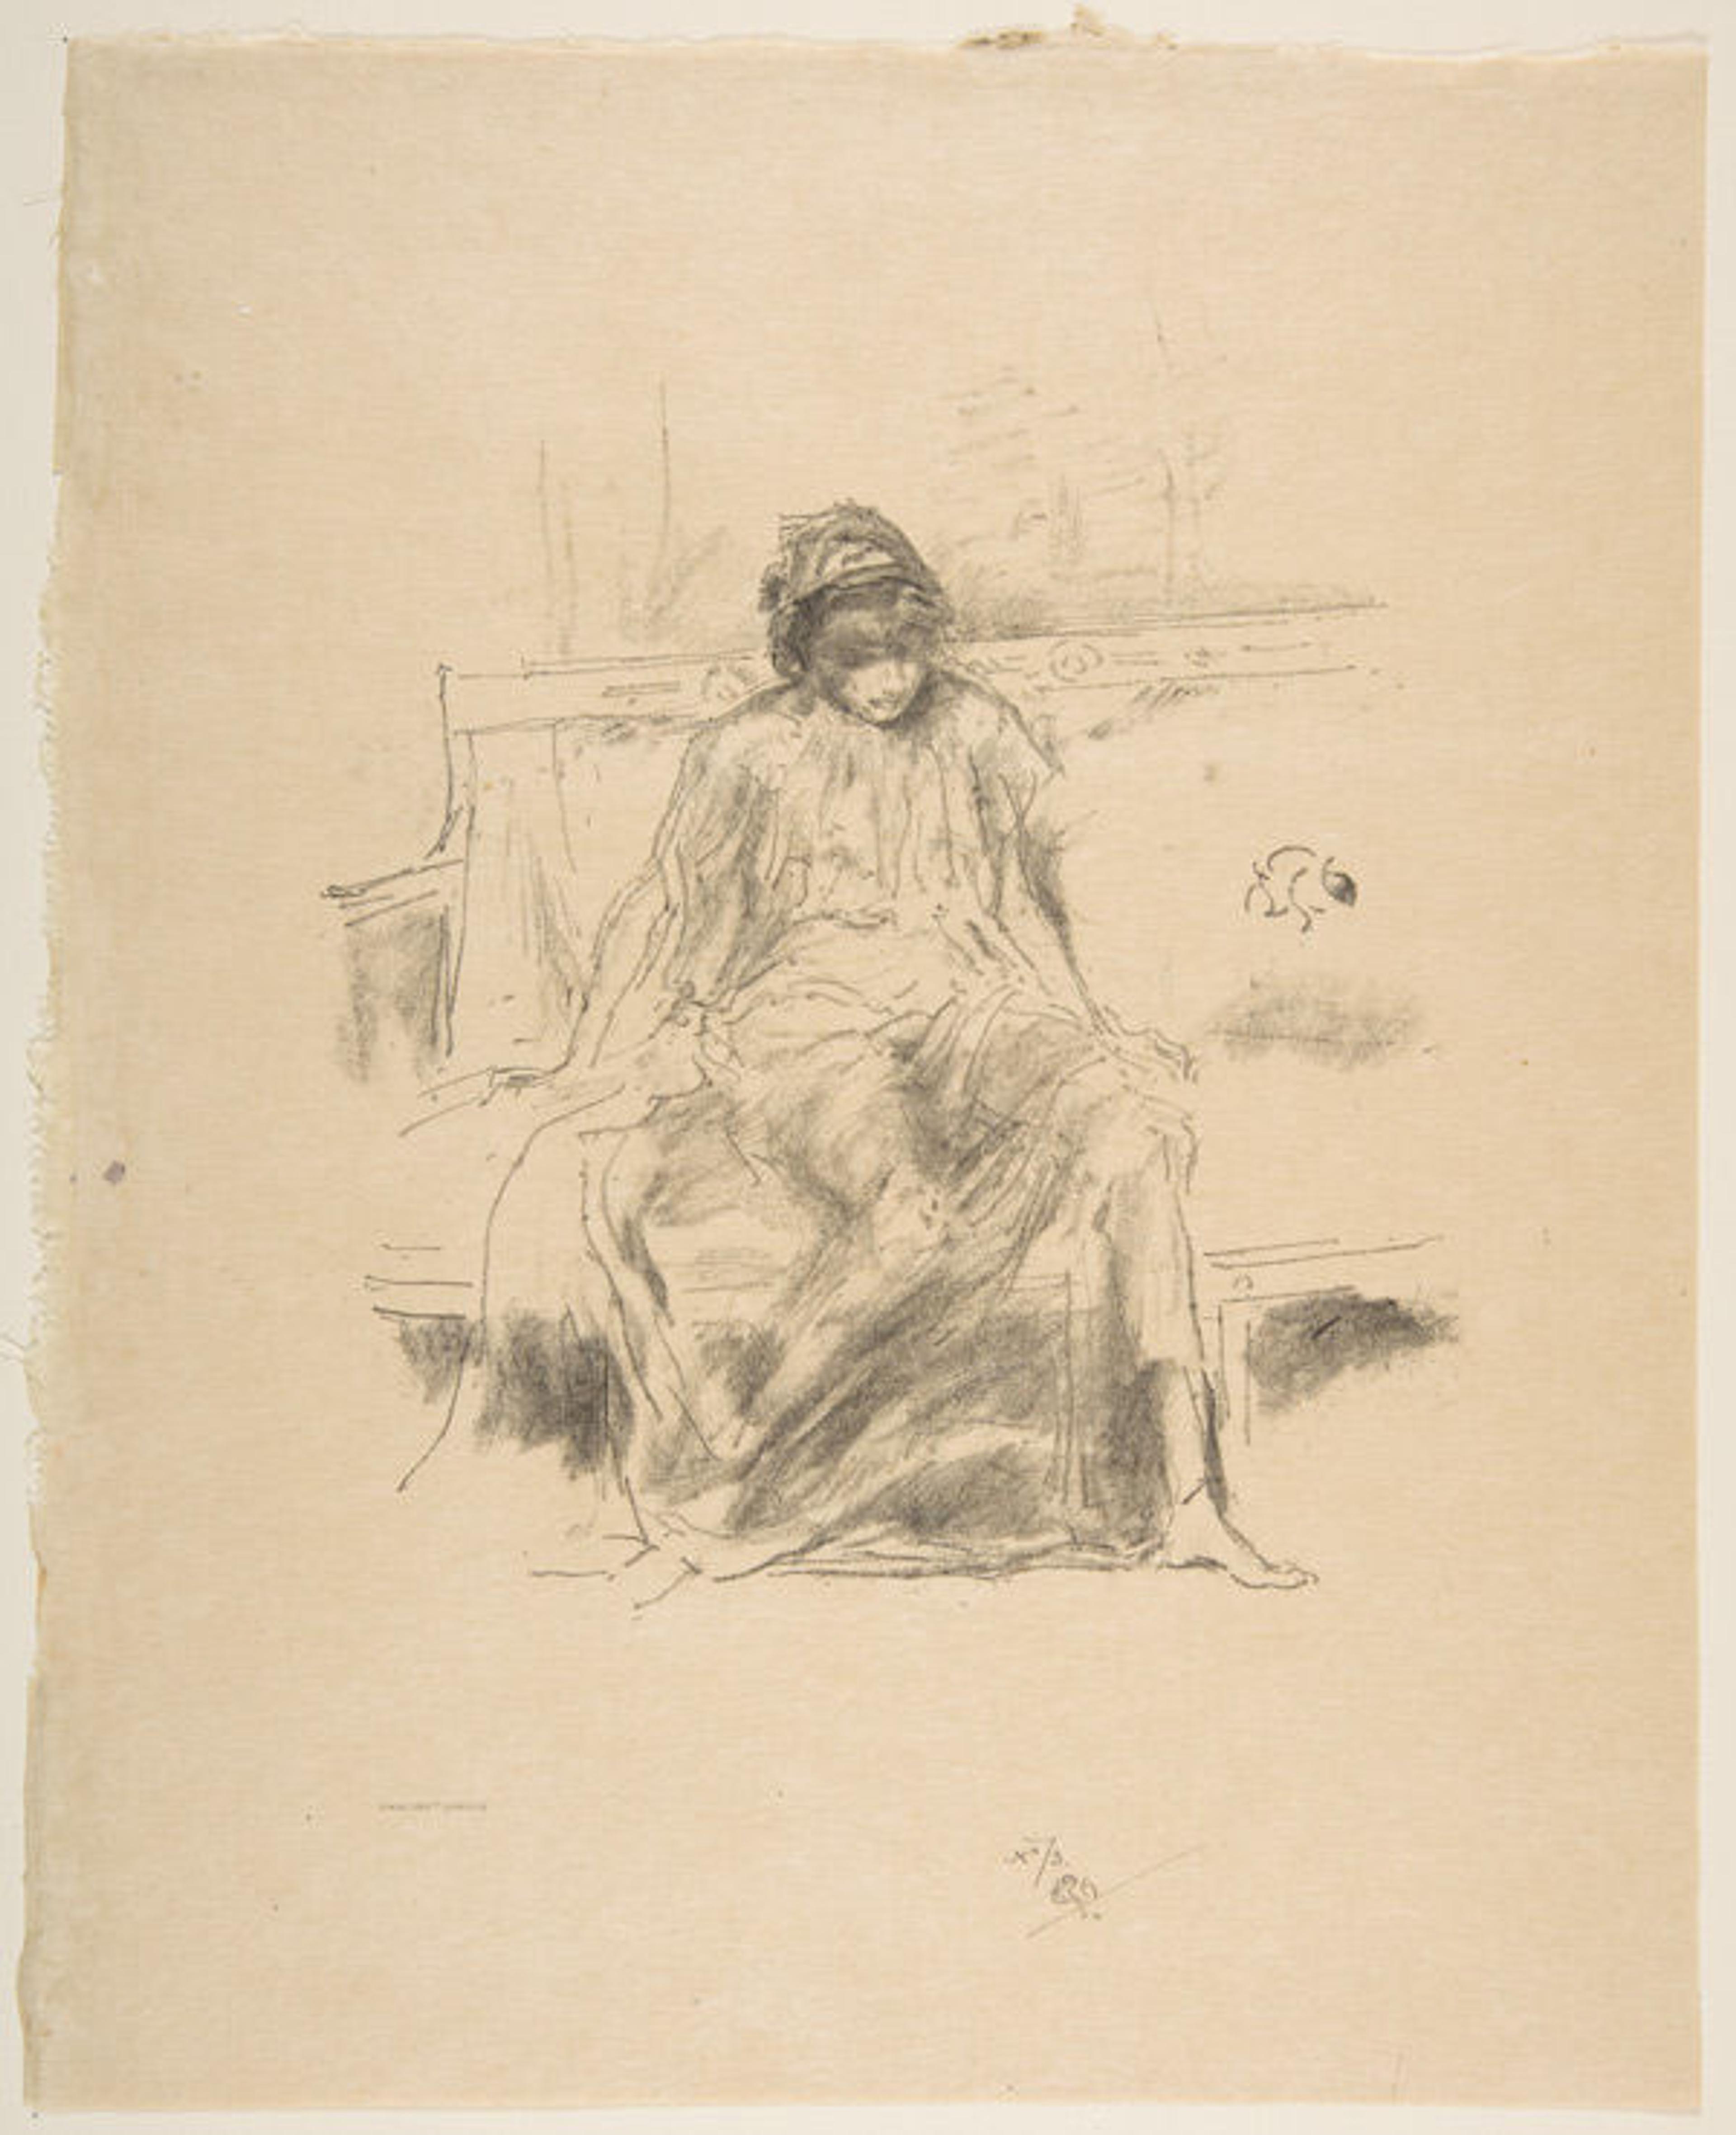 The Draped Figure Seated (from L'Estampe originale, Album IV), October–December 1893. James McNeill Whistler (American, 1834–1903) Printer Thomas Way (British, 1837–1915). Publisher André Marty (French, born 1857). Transfer lithograph with stumping, drawn on fine-grained transfer paper; only state (Chicago); printed in black ink on heavy weight tan laid Japanese vellum; Image: 7 1/4 x 6 3/8 in. (18.4 x 16.2 cm). Sheet: 11 7/16 x 9 1/4 in. (29.1 x 23.5 cm). The Metropolitan Museum of Art, New York, Rogers Fund, 1922 (22.82.1-40)